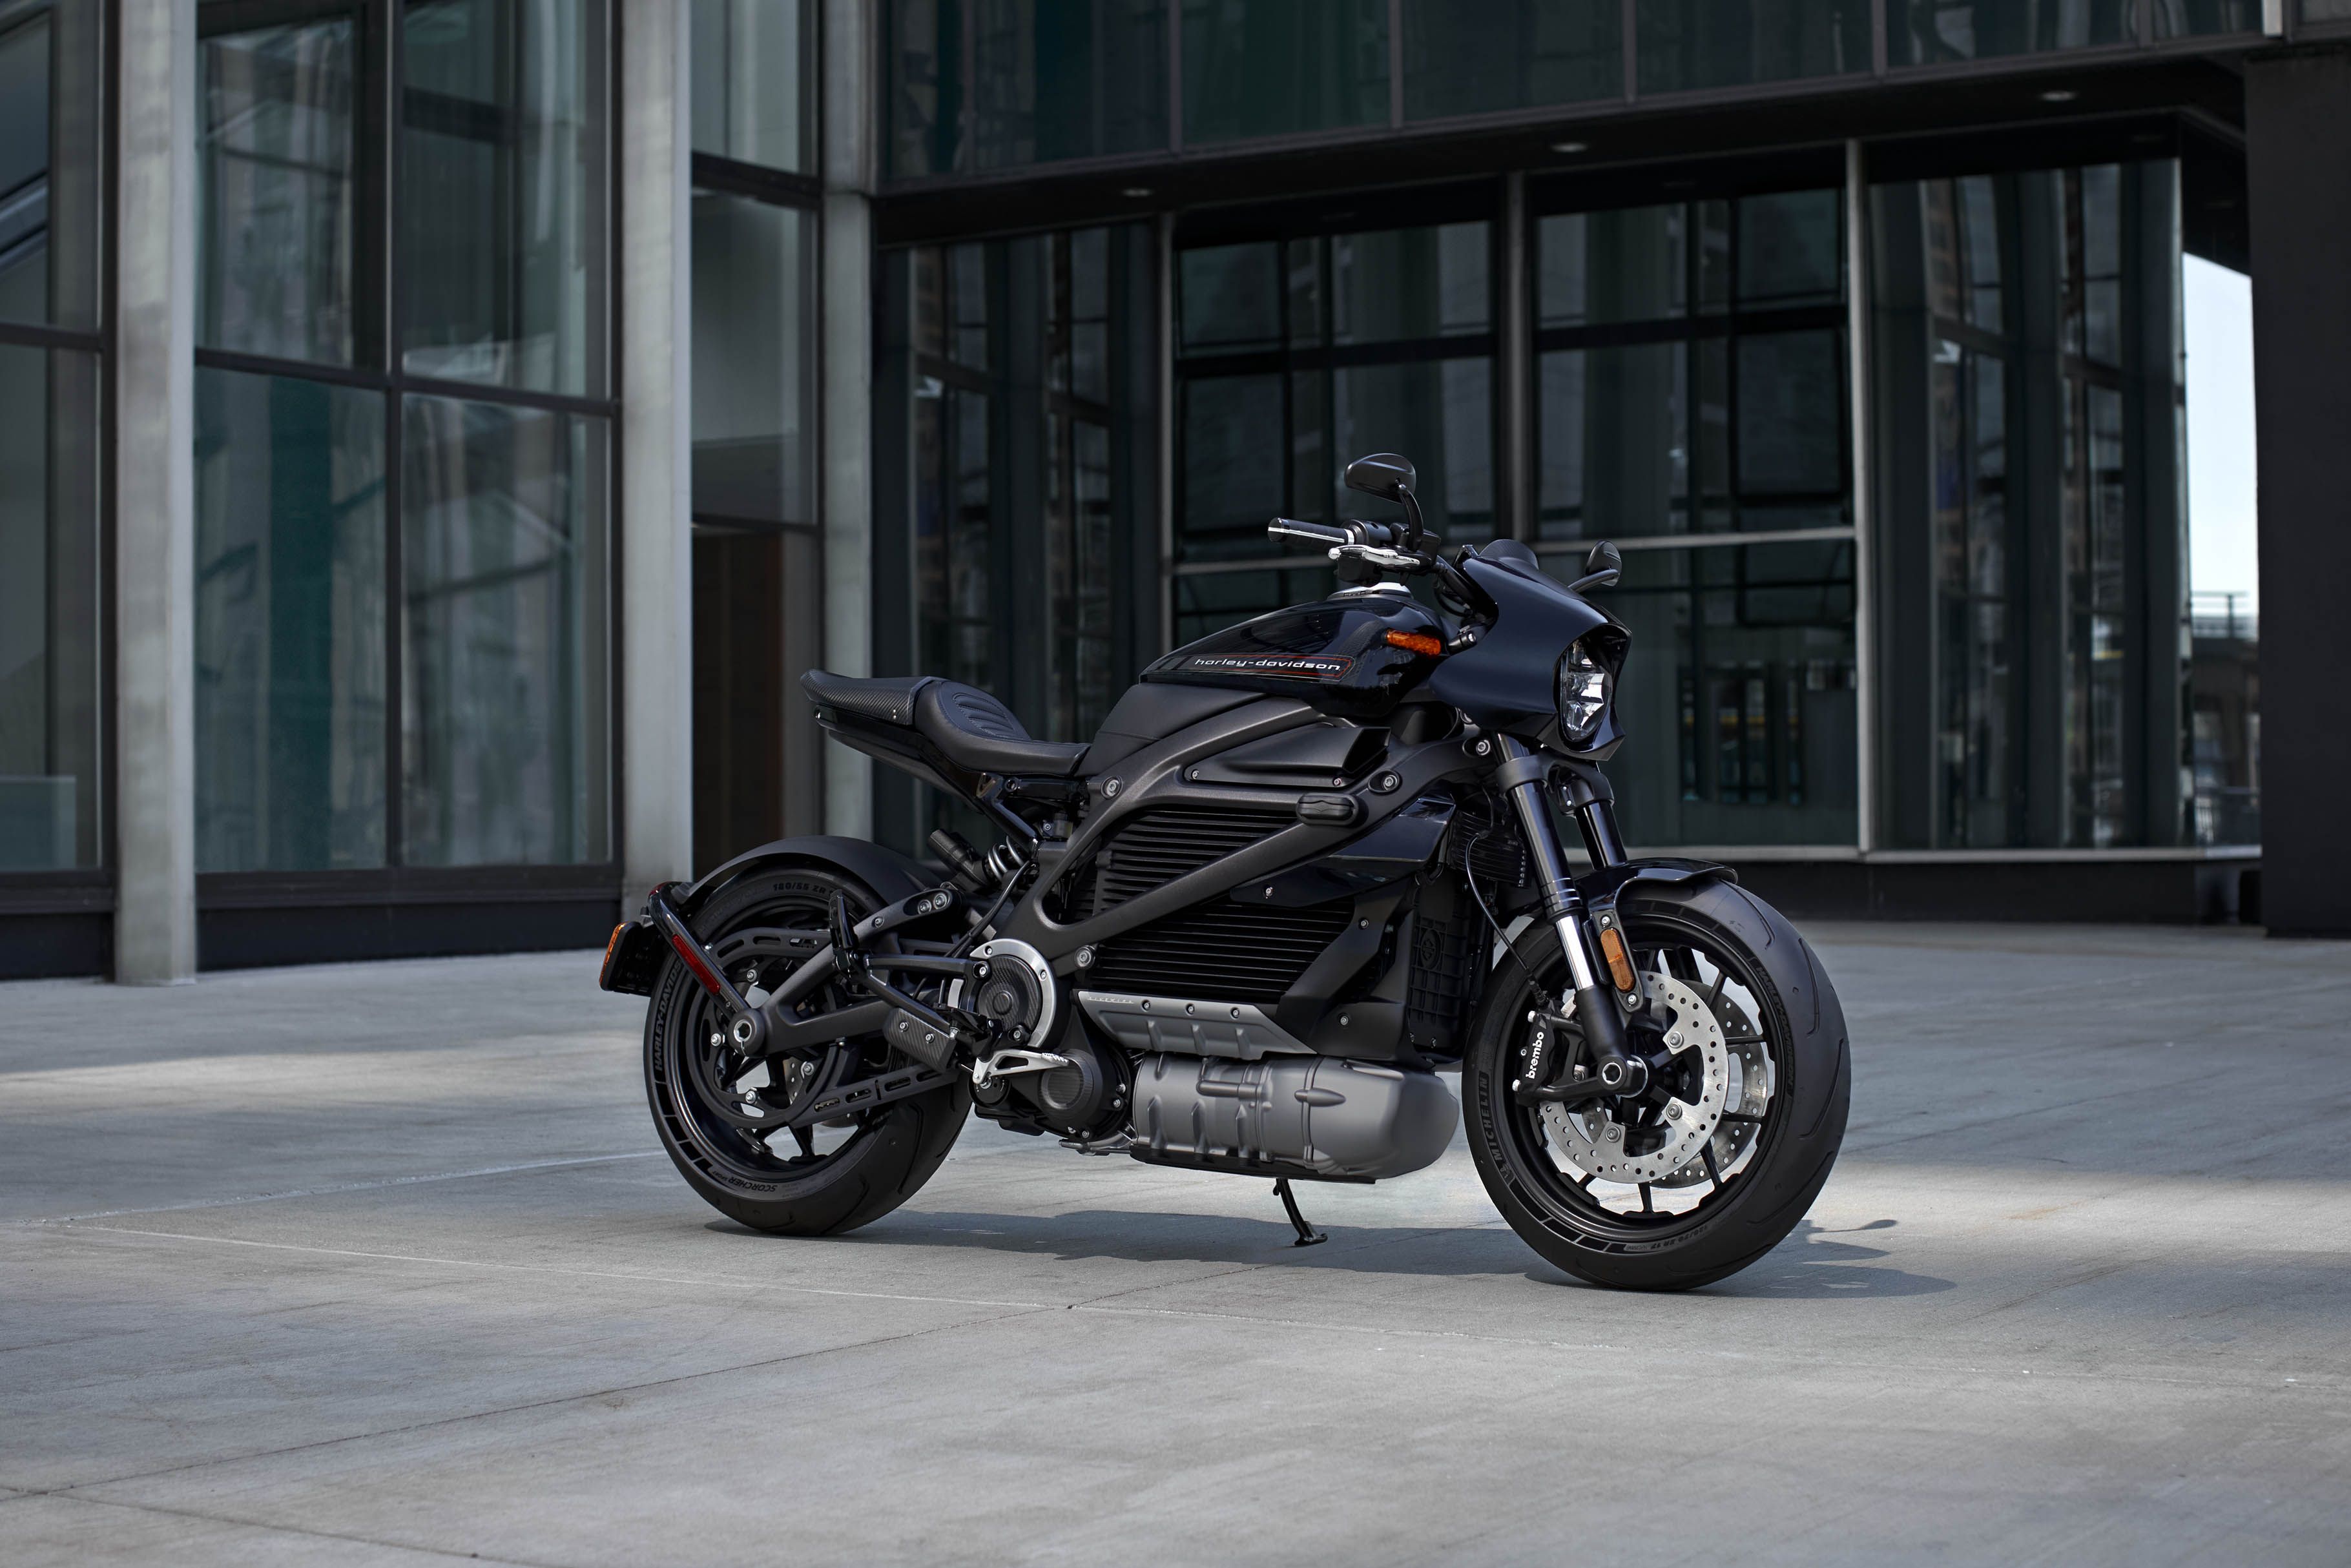 Harley Davidson Motorcycle Livewire Electric Vehicle Technology Debut